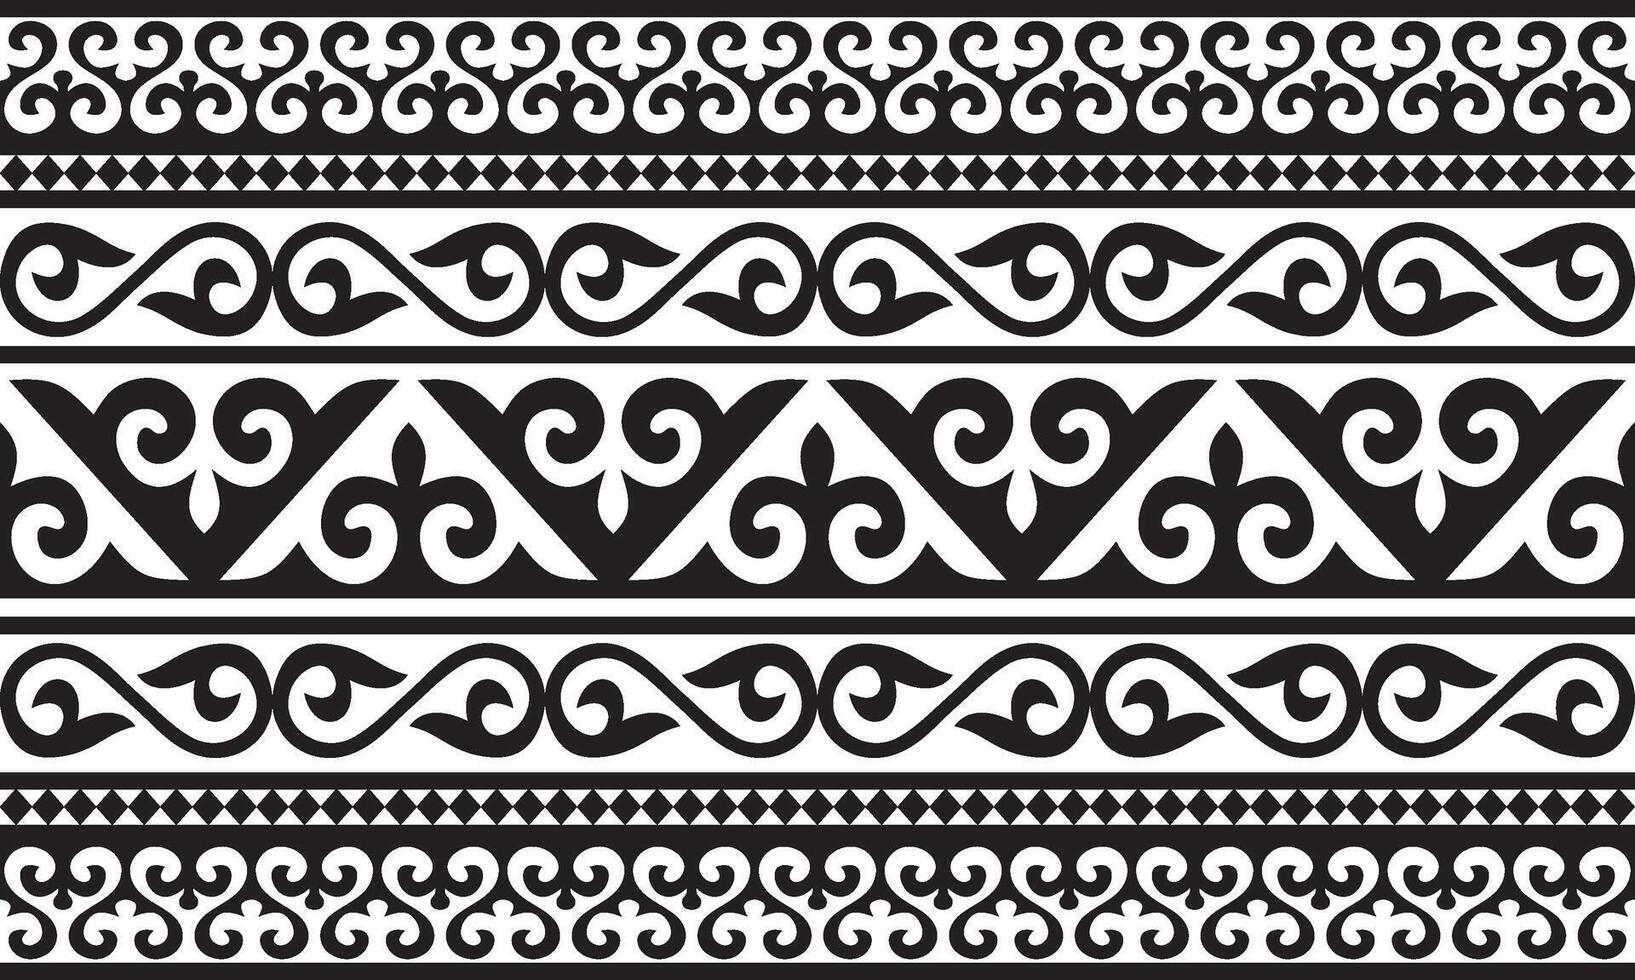 Vector monochrome seamless Kazakh national ornament, yurt decoration. Endless black border, frame of the nomadic peoples of the Great Steppe. For sandblasting, laser and plotter cutting.